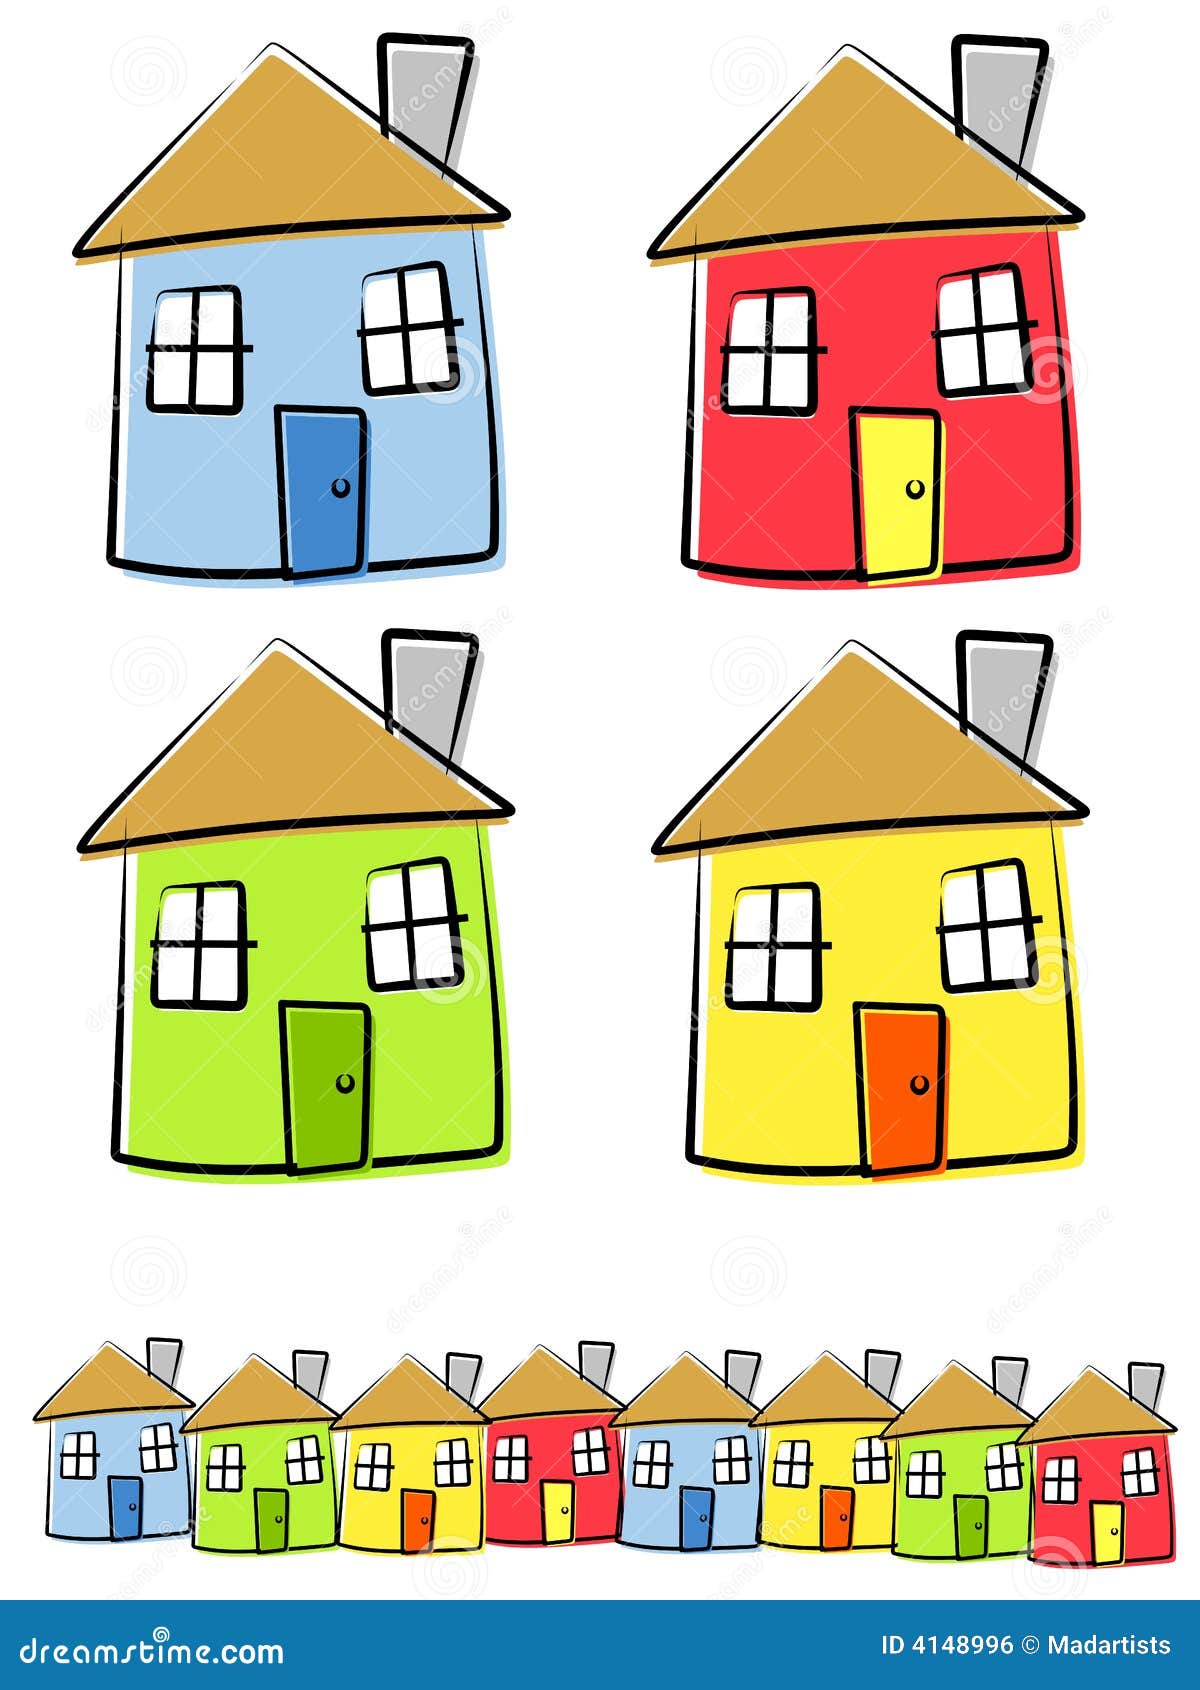 row of houses clipart - photo #40